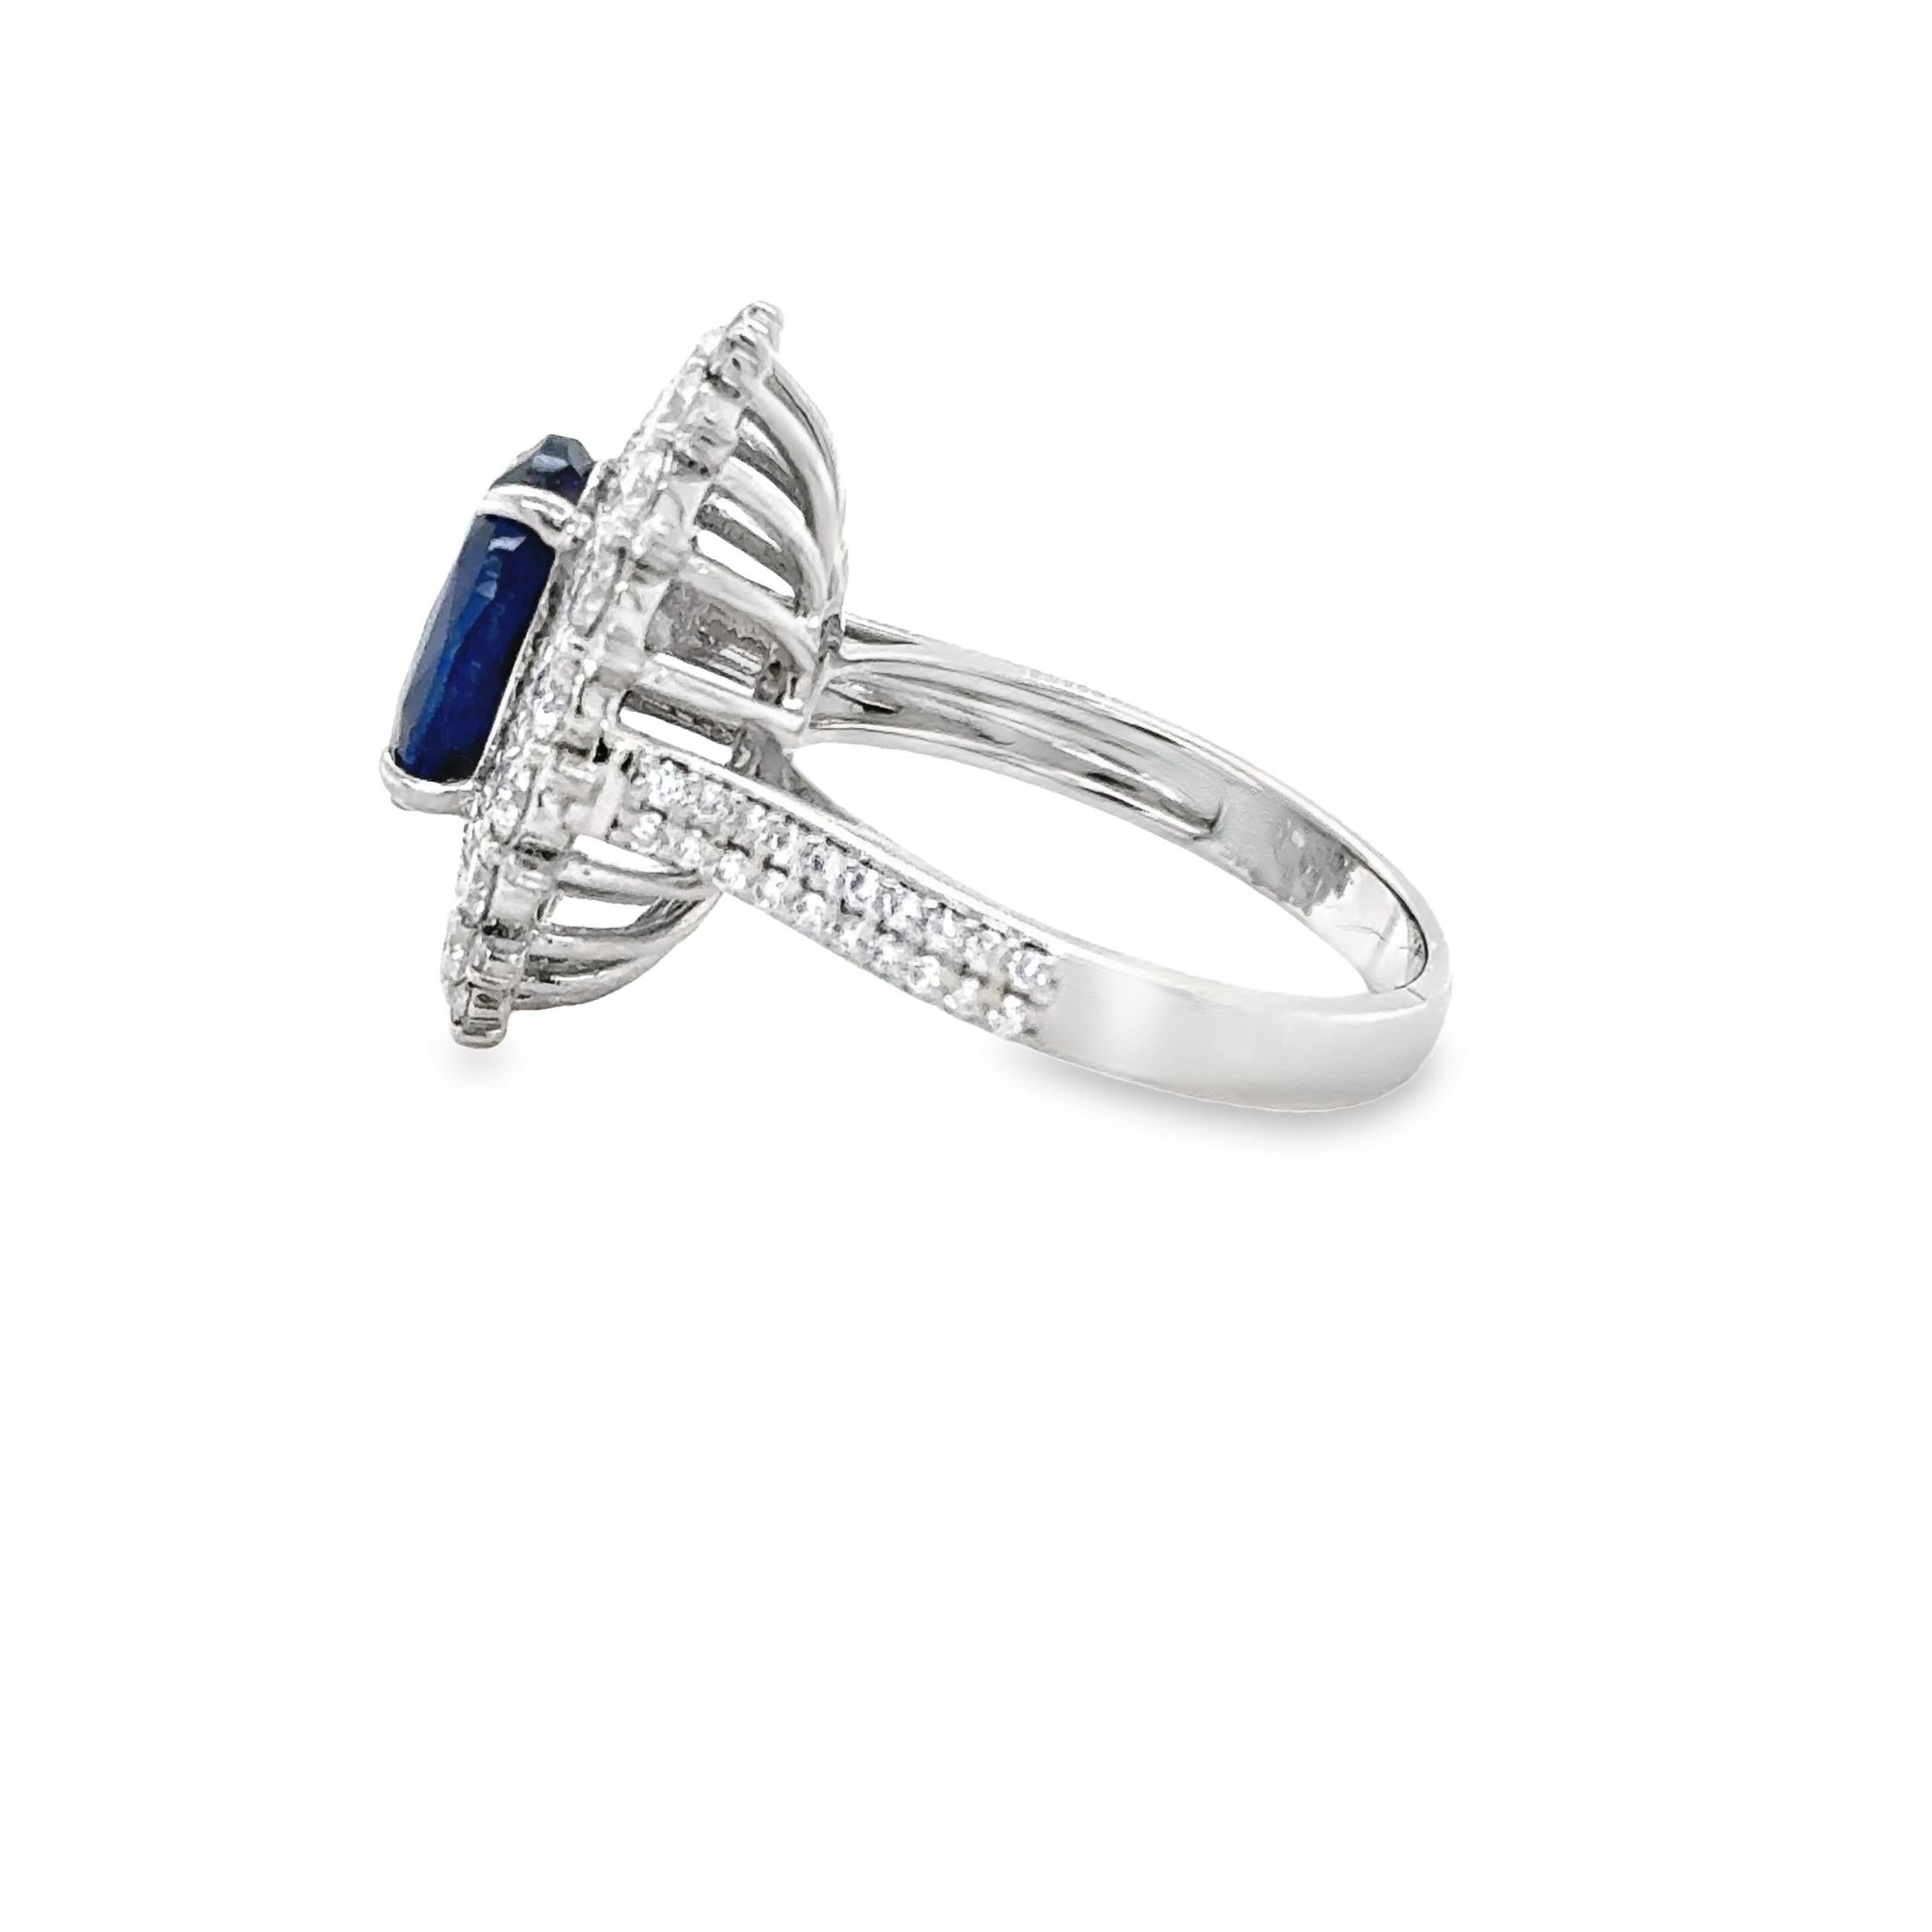 This gorgeous Sapphire cluster ring is set with a royal blue oval sapphire weighing 3.95ct , with open back setting. 
The gemstone is perfectly set in the centre of a beautiful cluster of over 100 round shaped diamonds weighing an approximate total